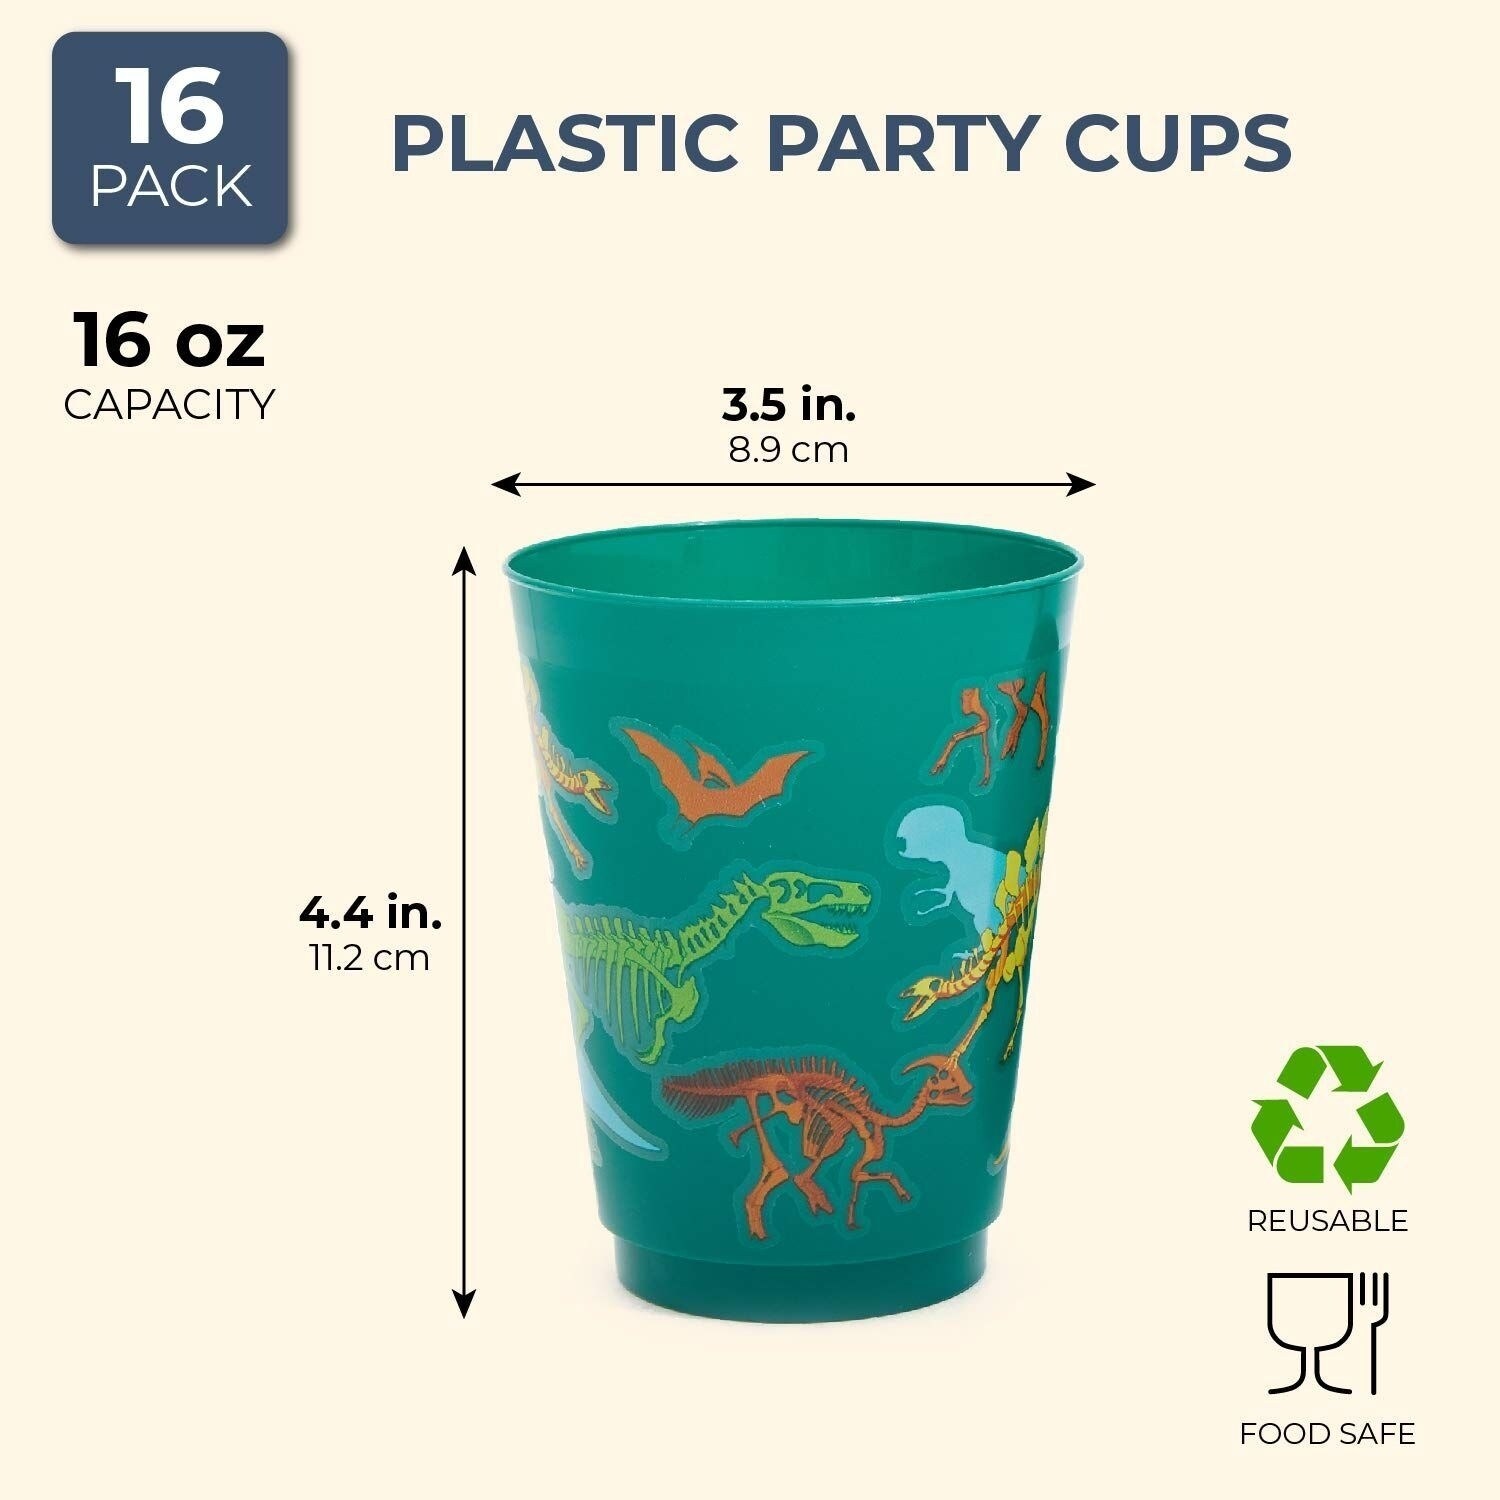 https://ak1.ostkcdn.com/images/products/31094364/16-Pack-Plastic-16-oz-Party-Cups-Dinosaur-Reusable-Disposable-Tumblers-for-Kid-Birthday-Parties-Green-f09bba68-21ac-484b-b2dd-e885e9a4af23.jpg